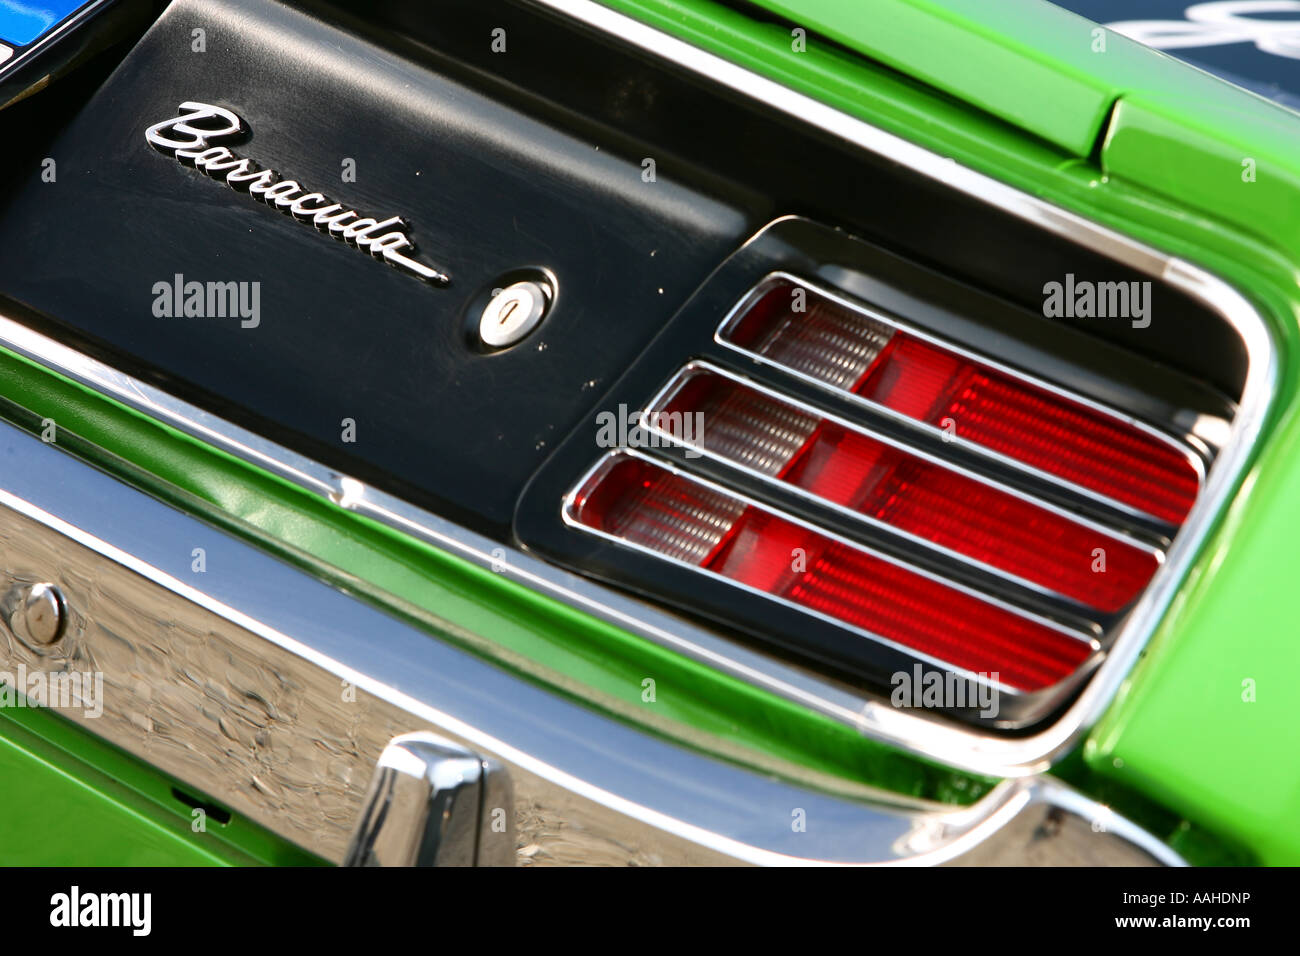 Plymouth Barracuda details Stock Photo